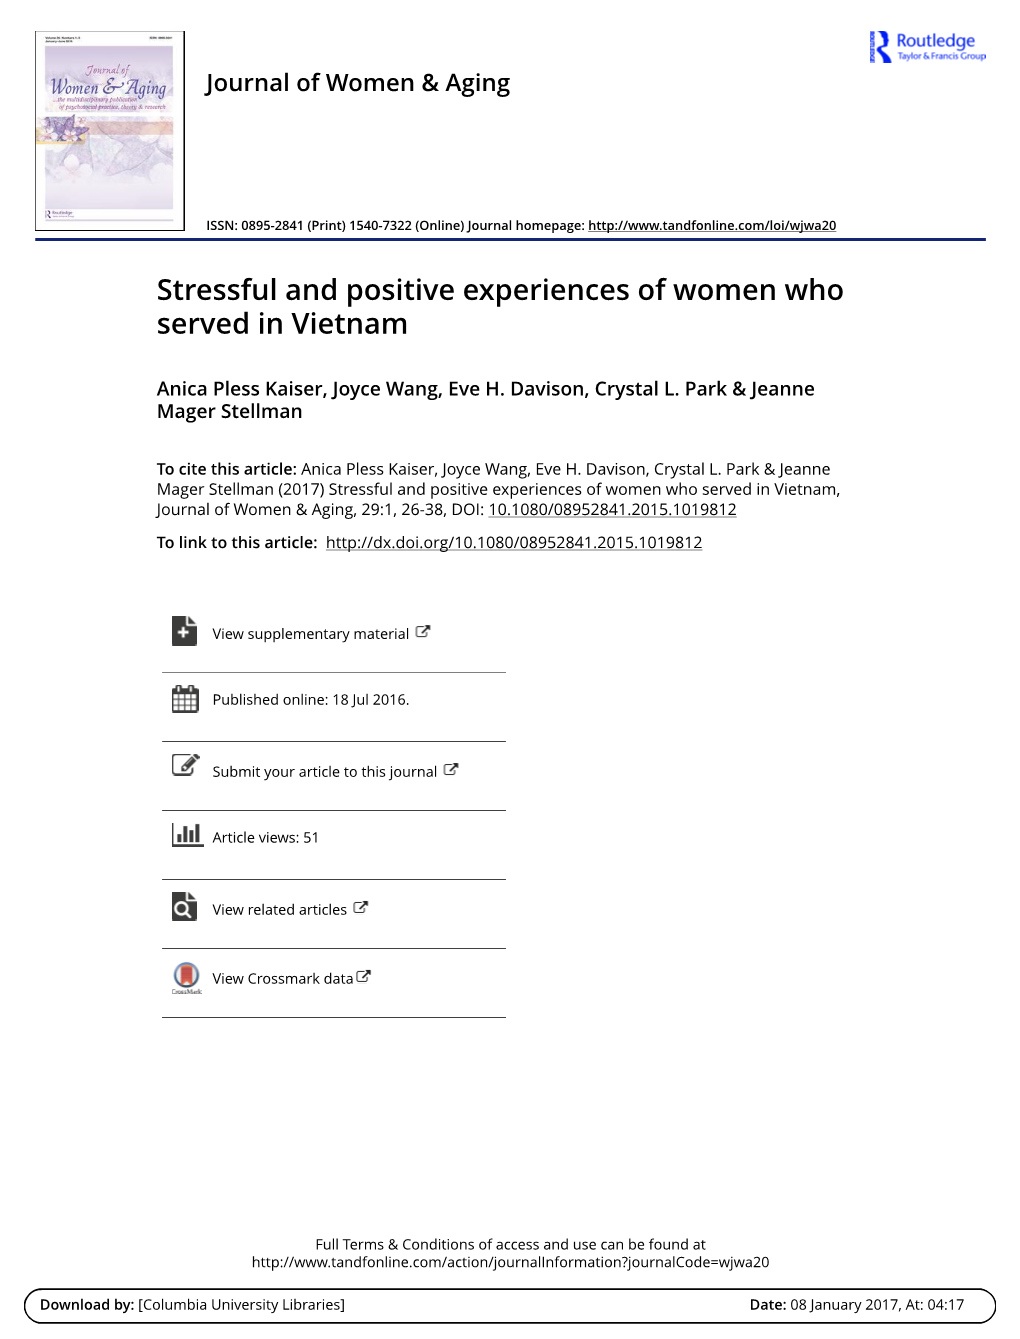 Stressful and Positive Experiences of Women Who Served in Vietnam